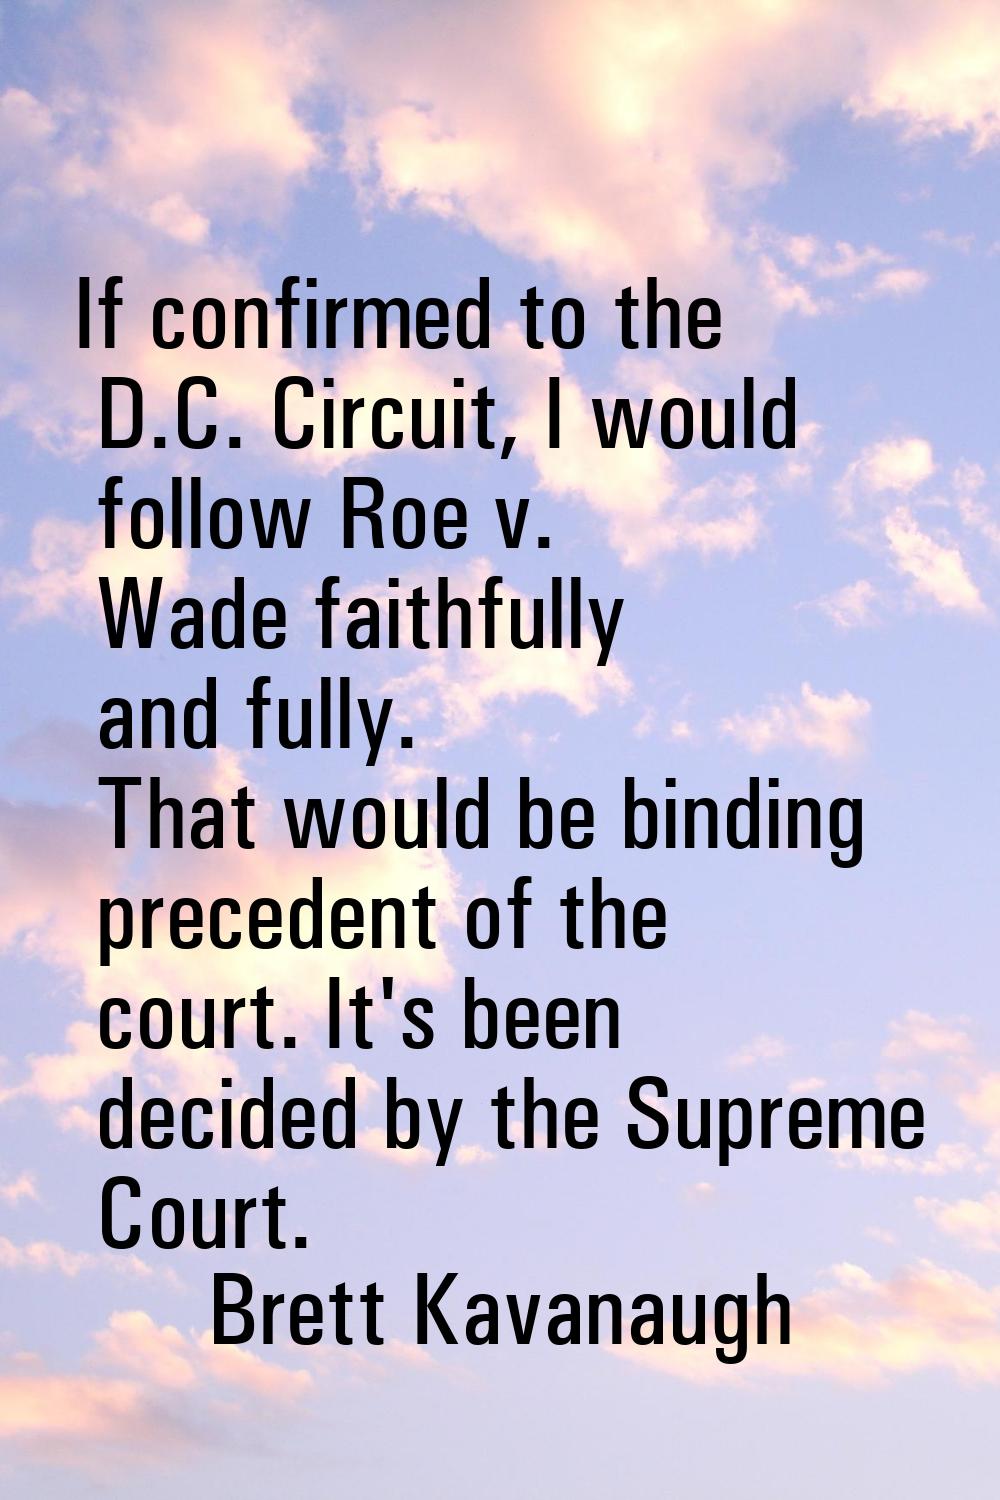 If confirmed to the D.C. Circuit, I would follow Roe v. Wade faithfully and fully. That would be bi